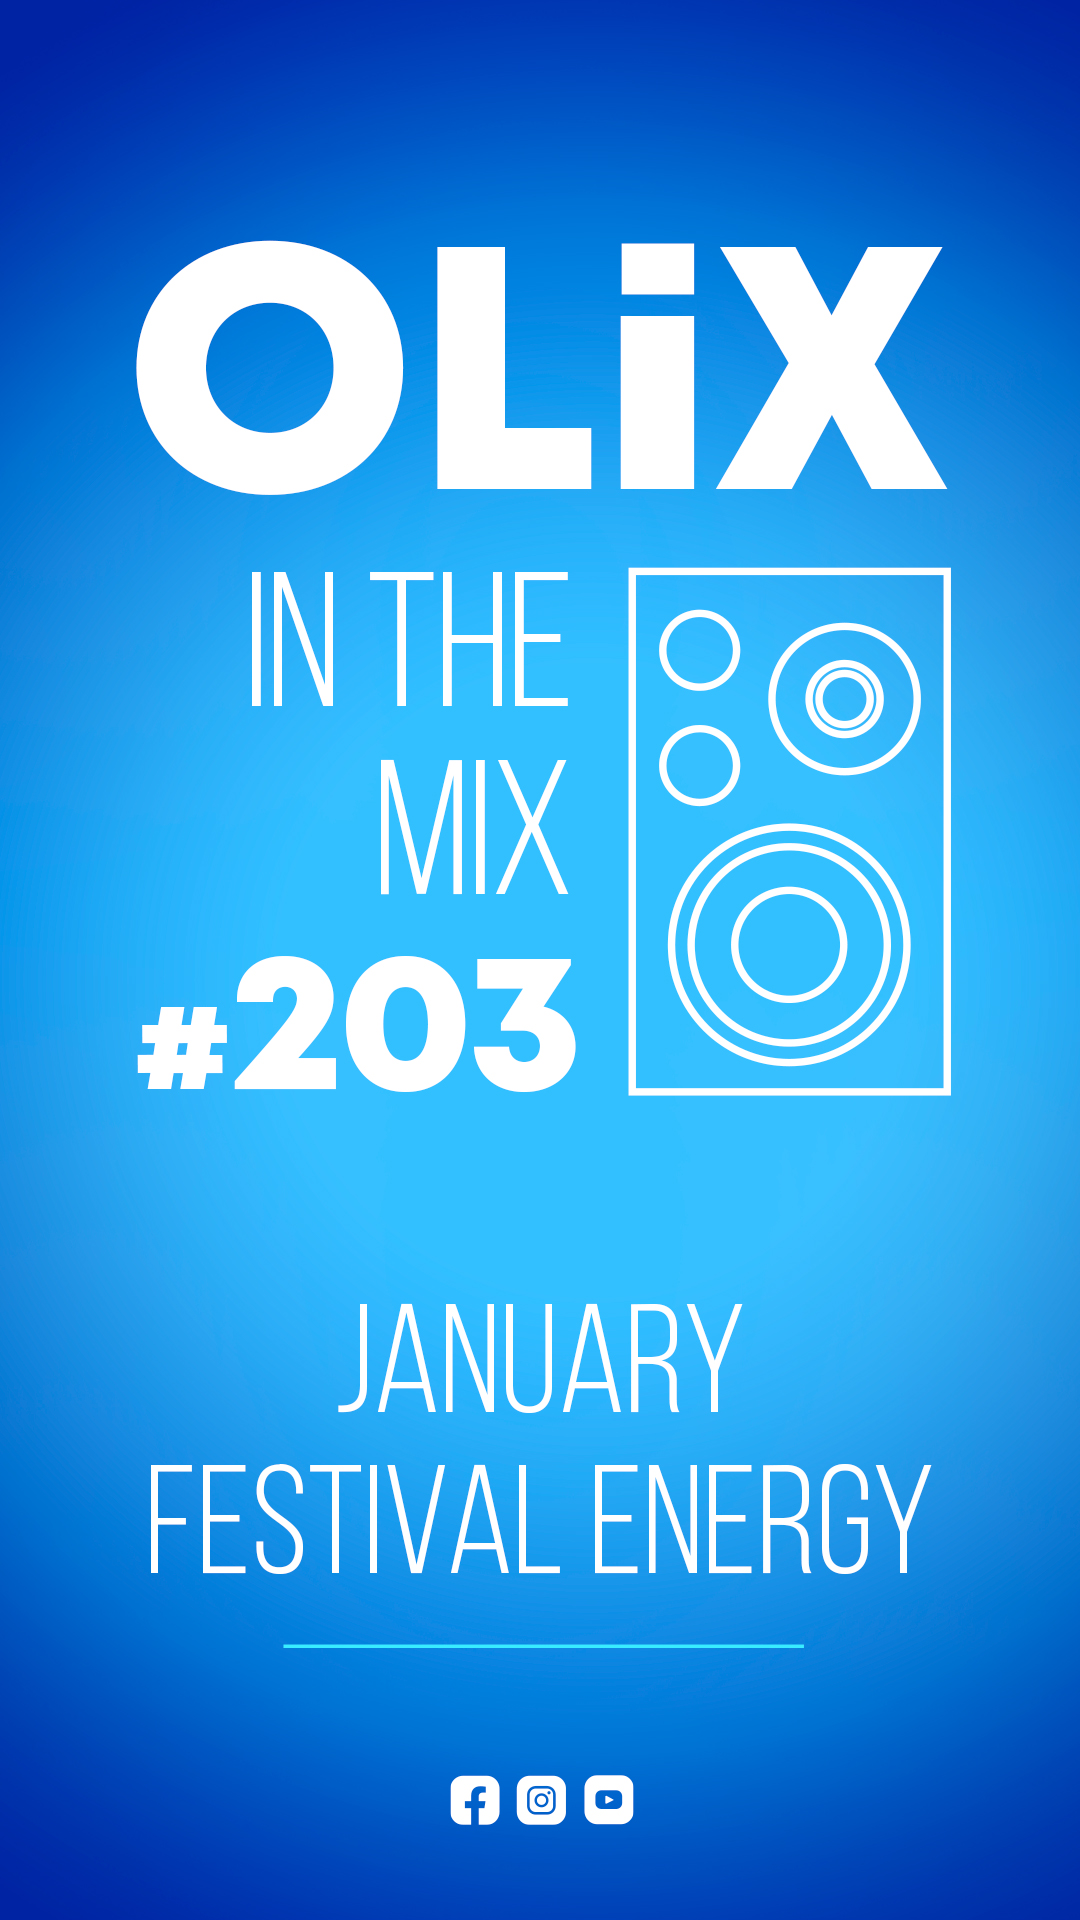 OLiX in the Mix - 203 - January Festival Energy